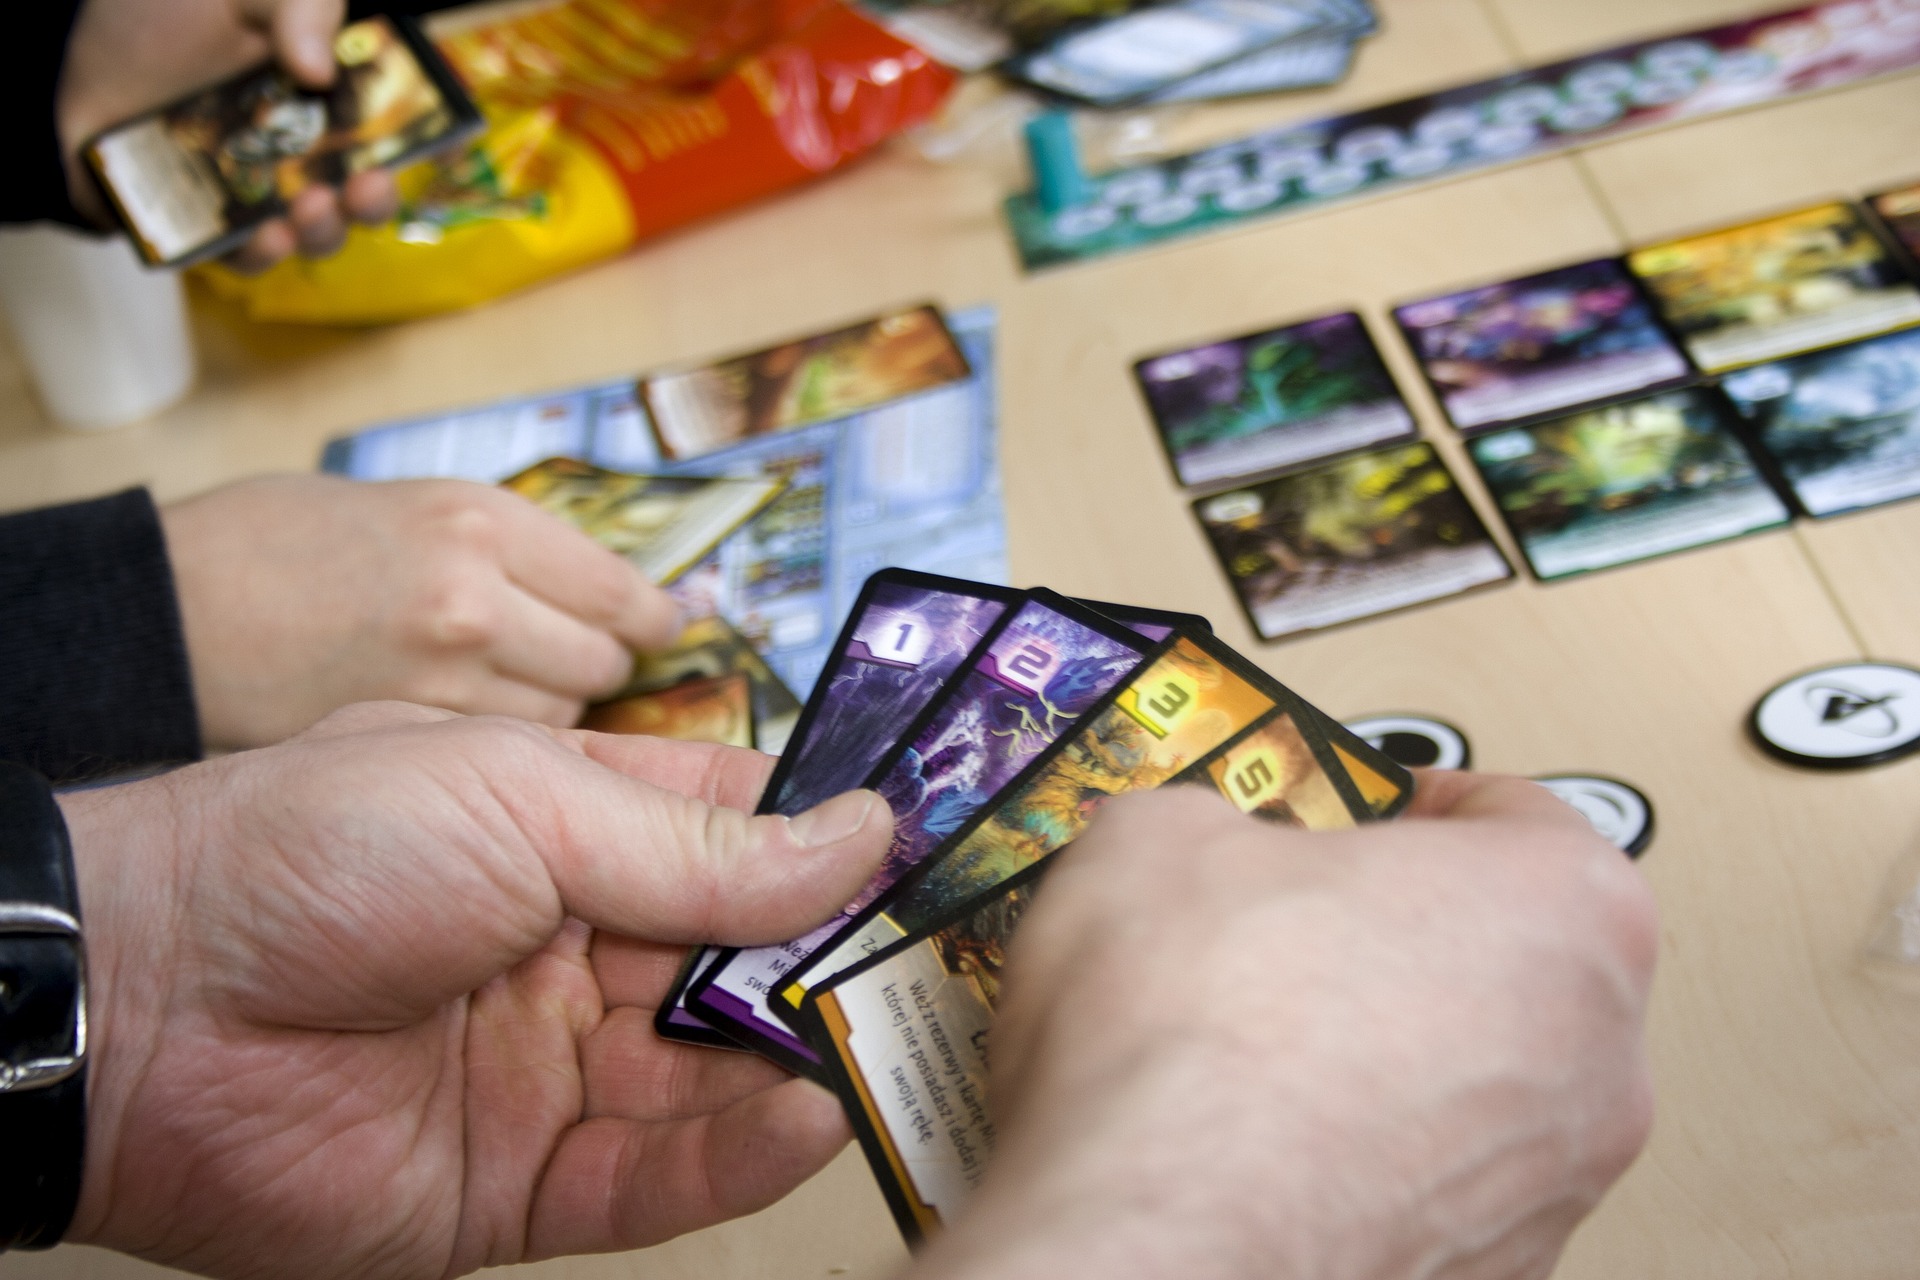 A set of hands holding cards in front of a gaming set up with snacks in the background.